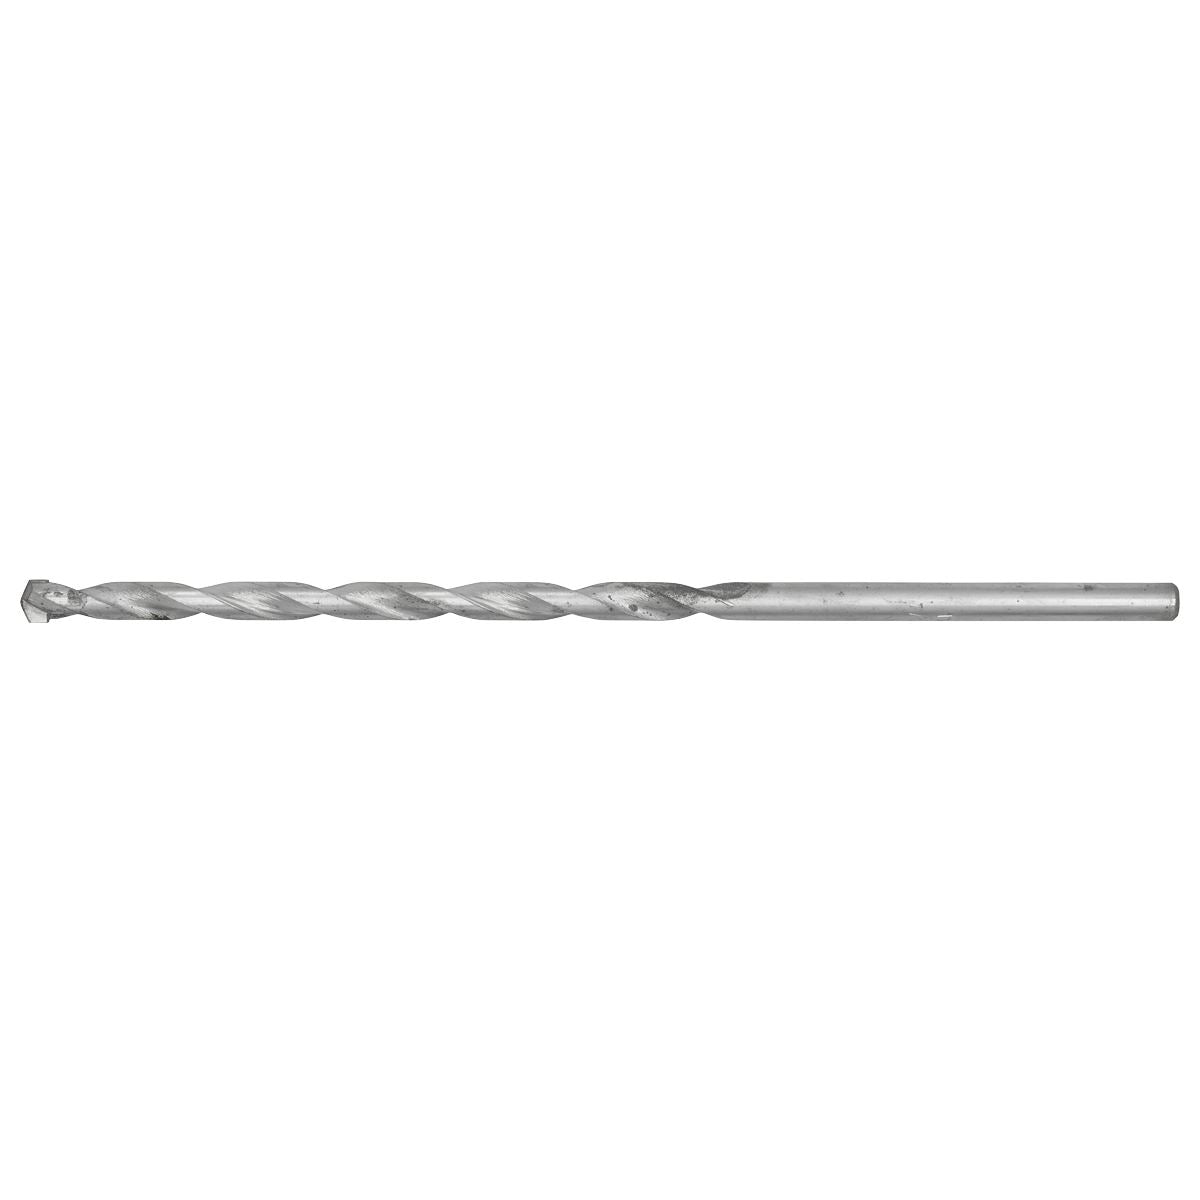 Worksafe by Sealey Straight Shank Rotary Impact Drill Bit Ø11 x 300mm